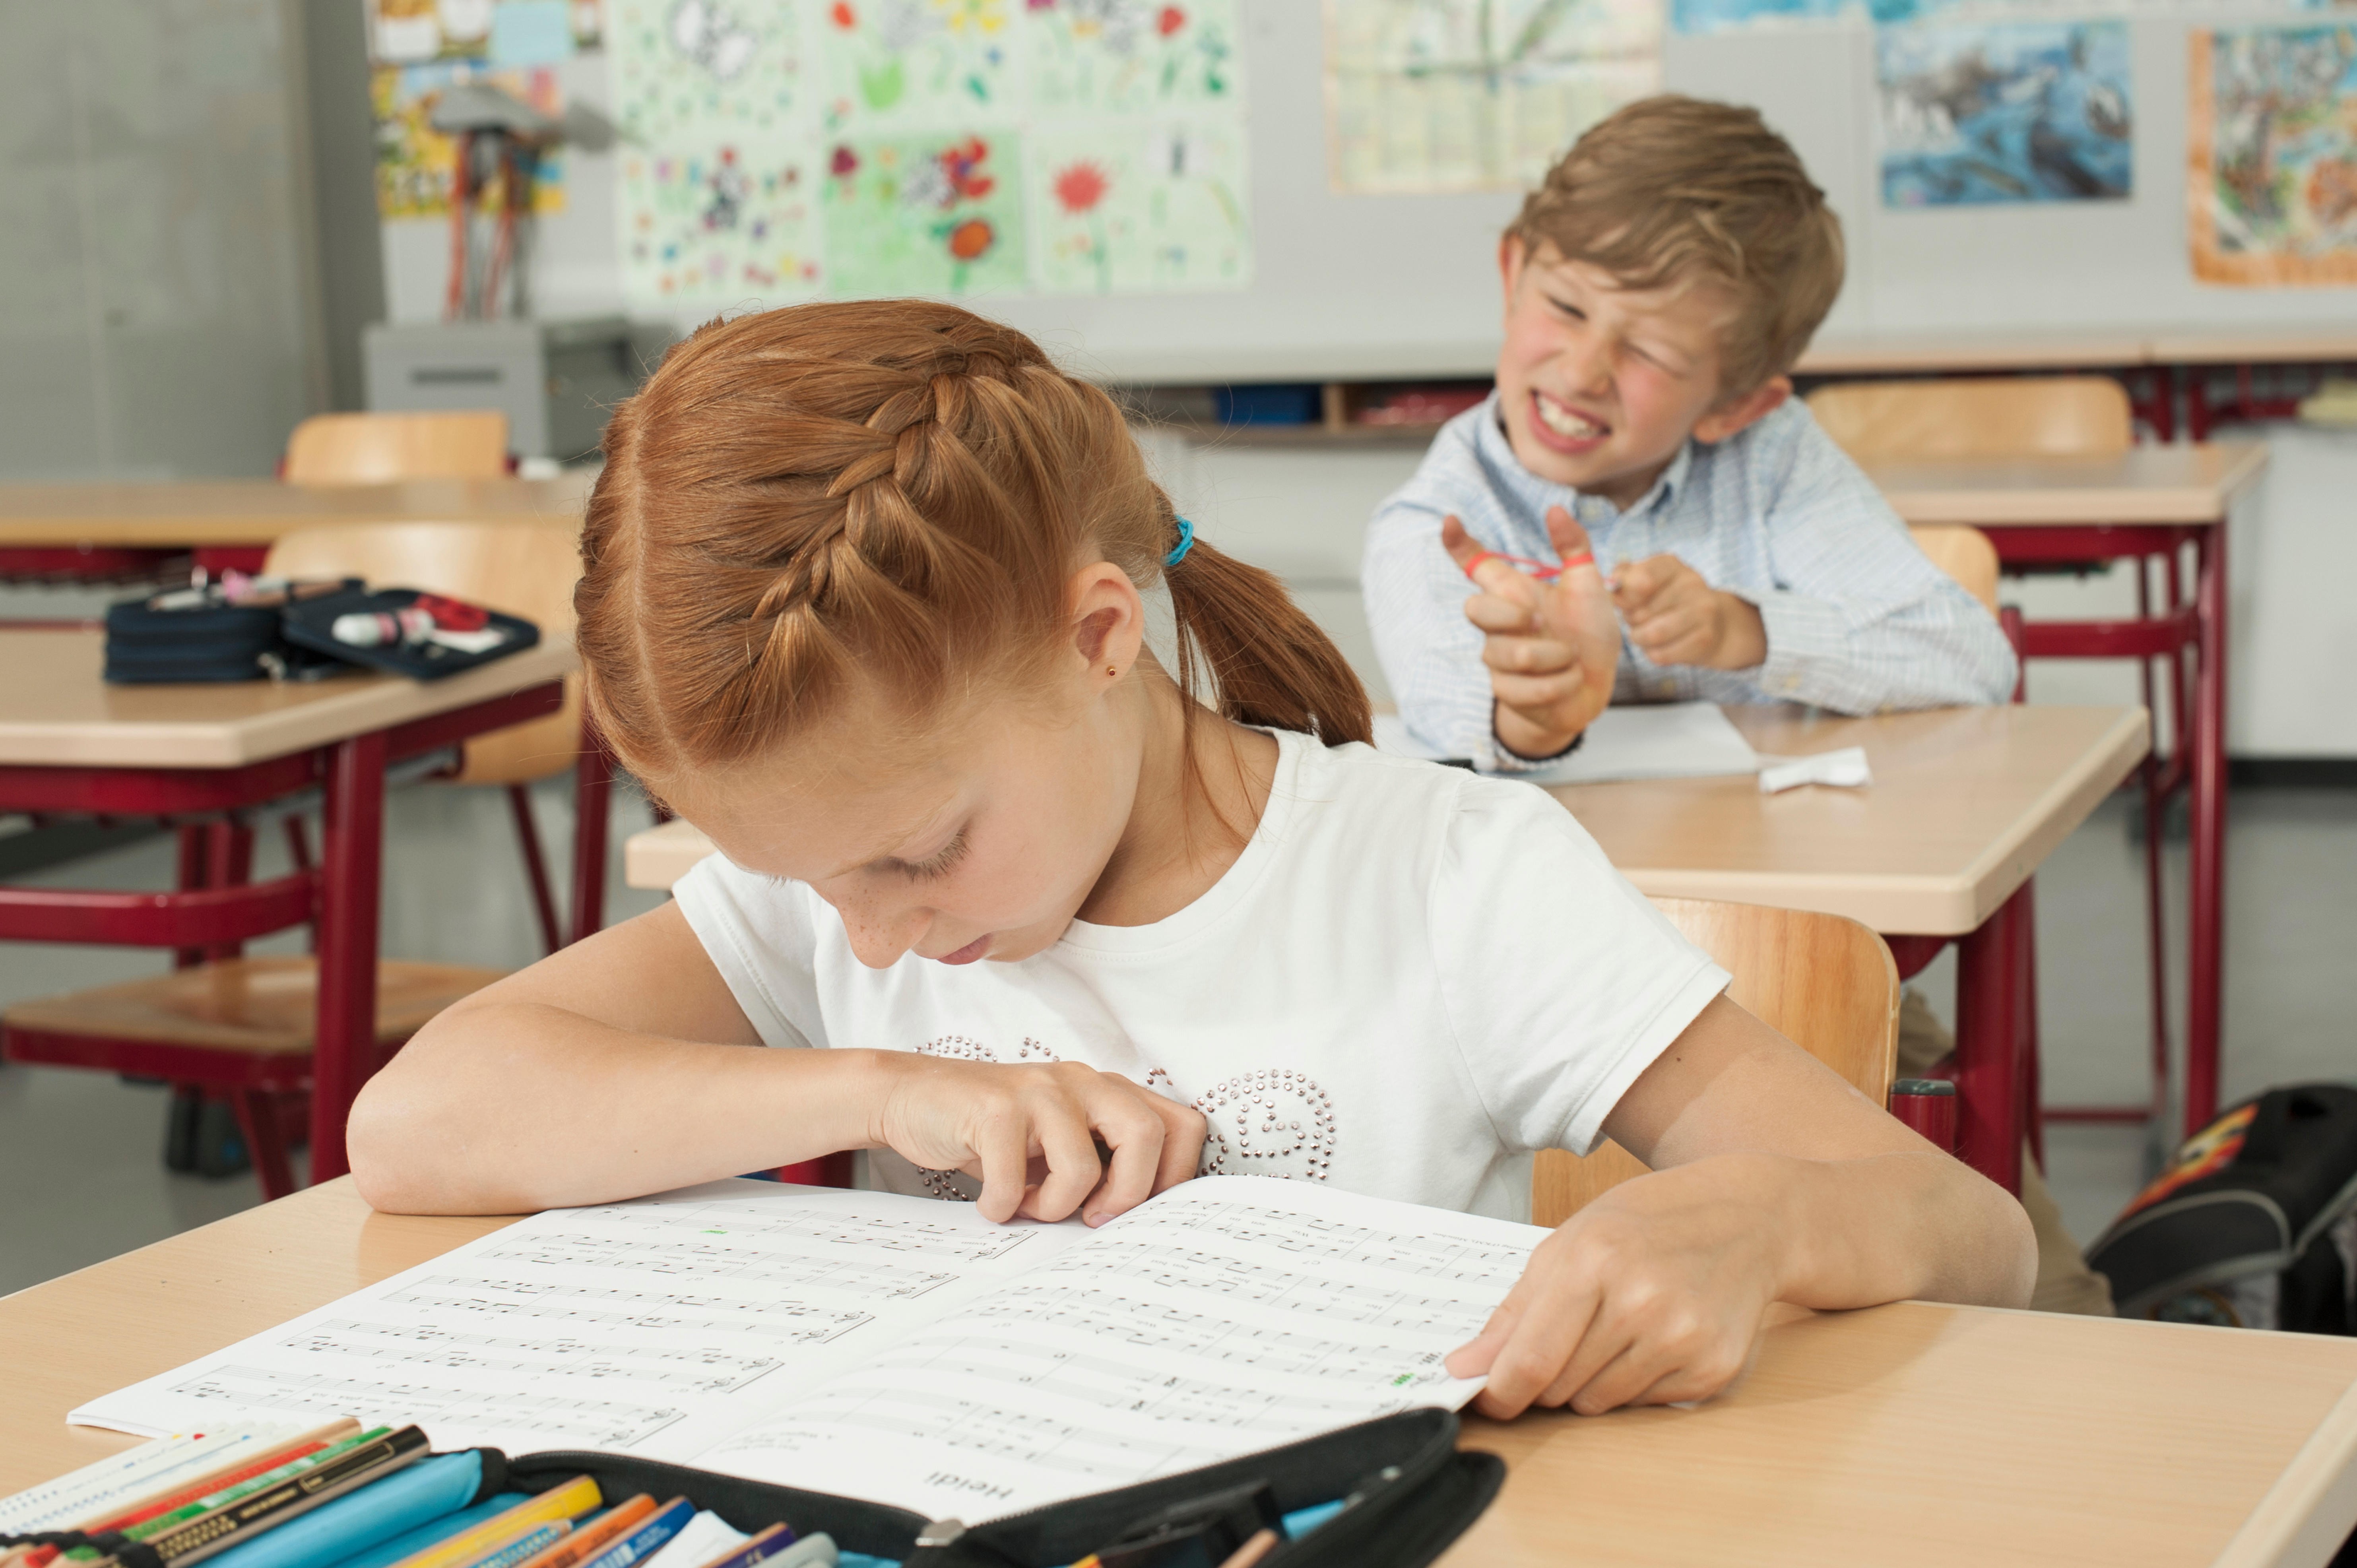 The disruptive behaviour of classmates can result in some schoolchildren feeling anxious or uncomfortable in class. Photo: Alamy